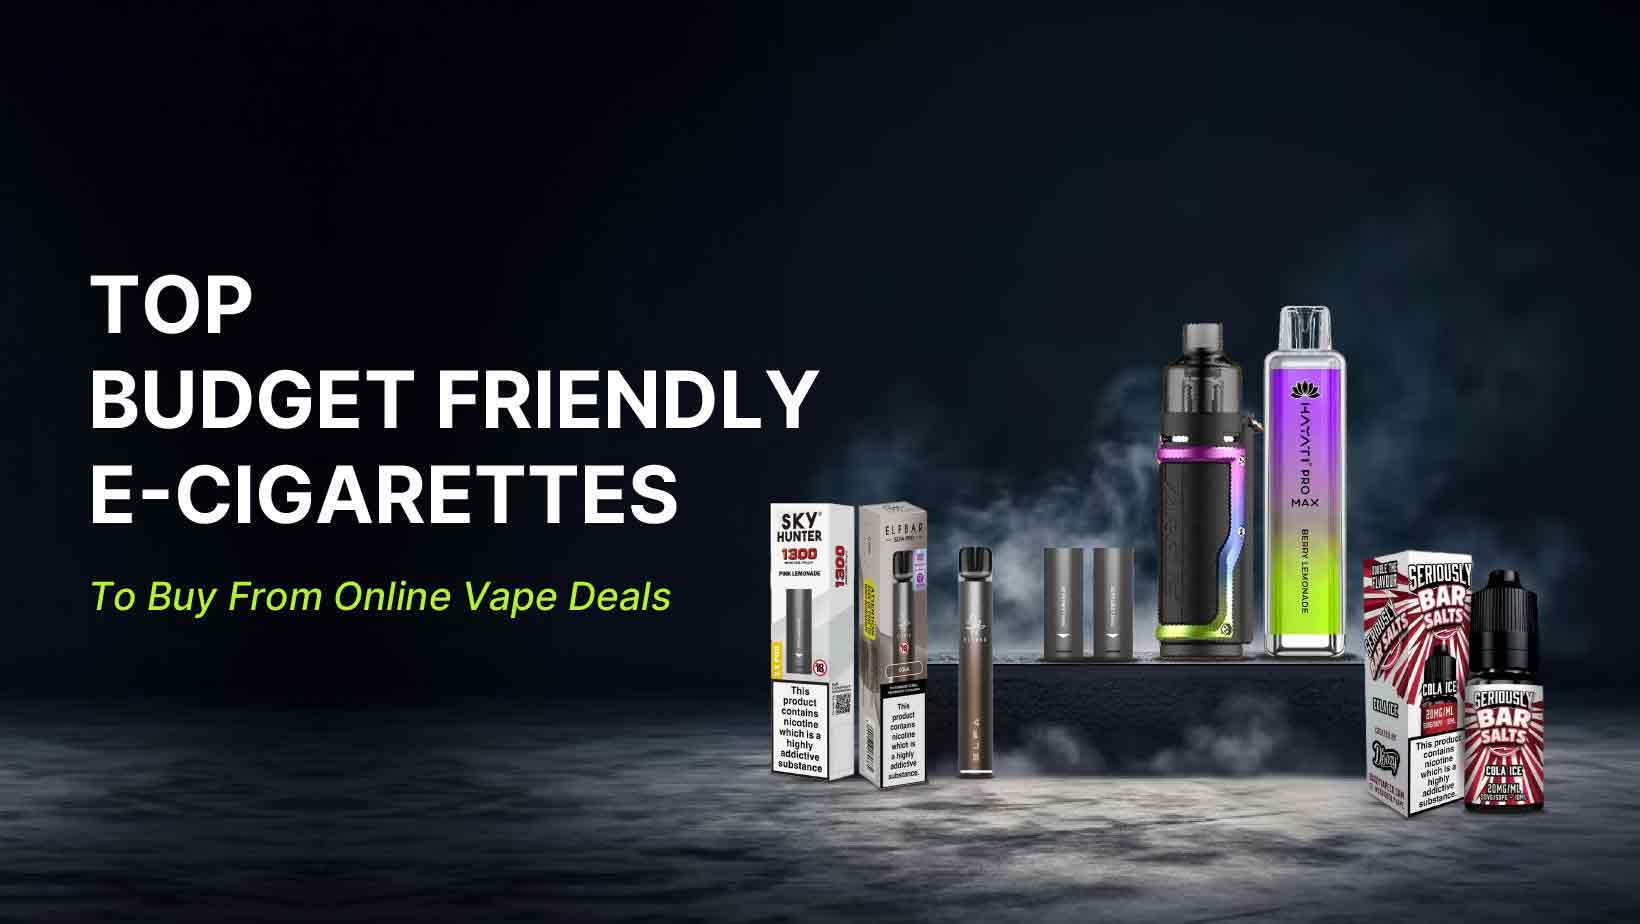 Top Budget-Friendly E-cigarettes To Buy From Online Vape Deals